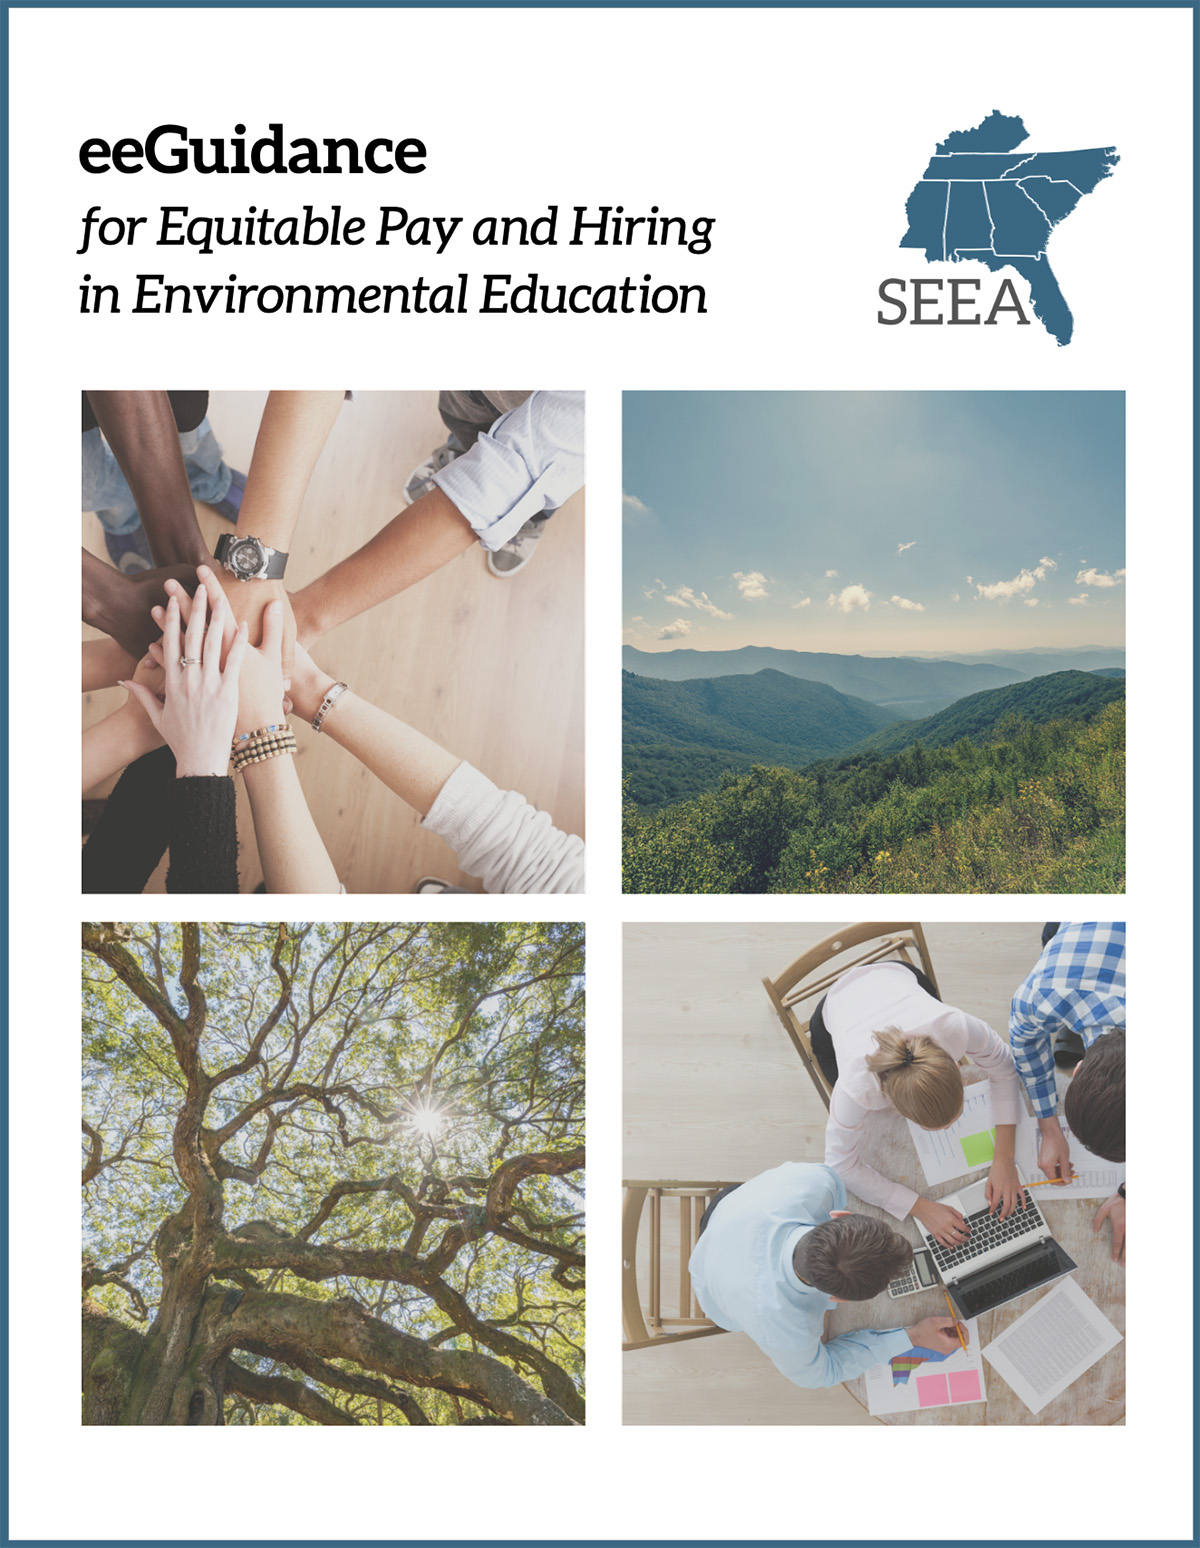 A blue outline of a letter-sized paper with "eeGuidance for Equitable Pay and Hiring in Environmental Education" at the top, along with the SEEA logo: Southeastern states filled with royal blue. Below, four square pictures including multiple hands with different skin tones, a mountainous landscape, a tree, and people working at a computer.